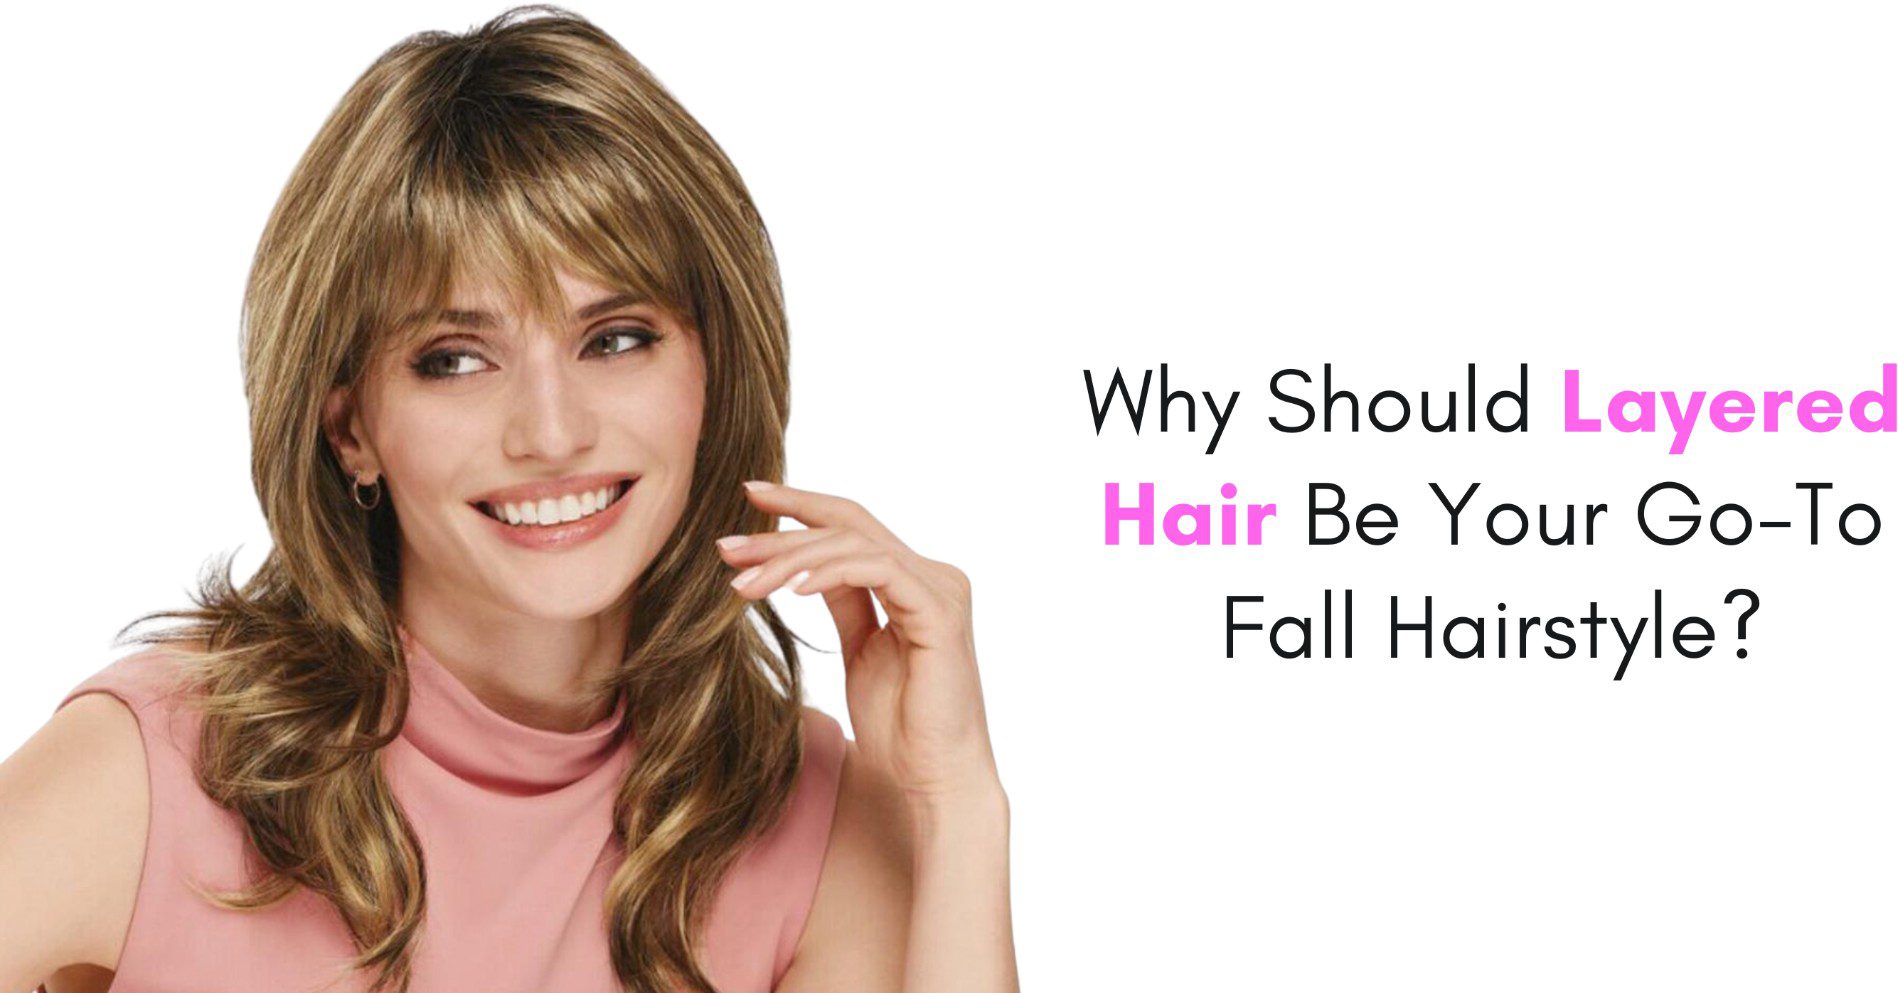 why should layered hair be your first go-to fall hairstyle